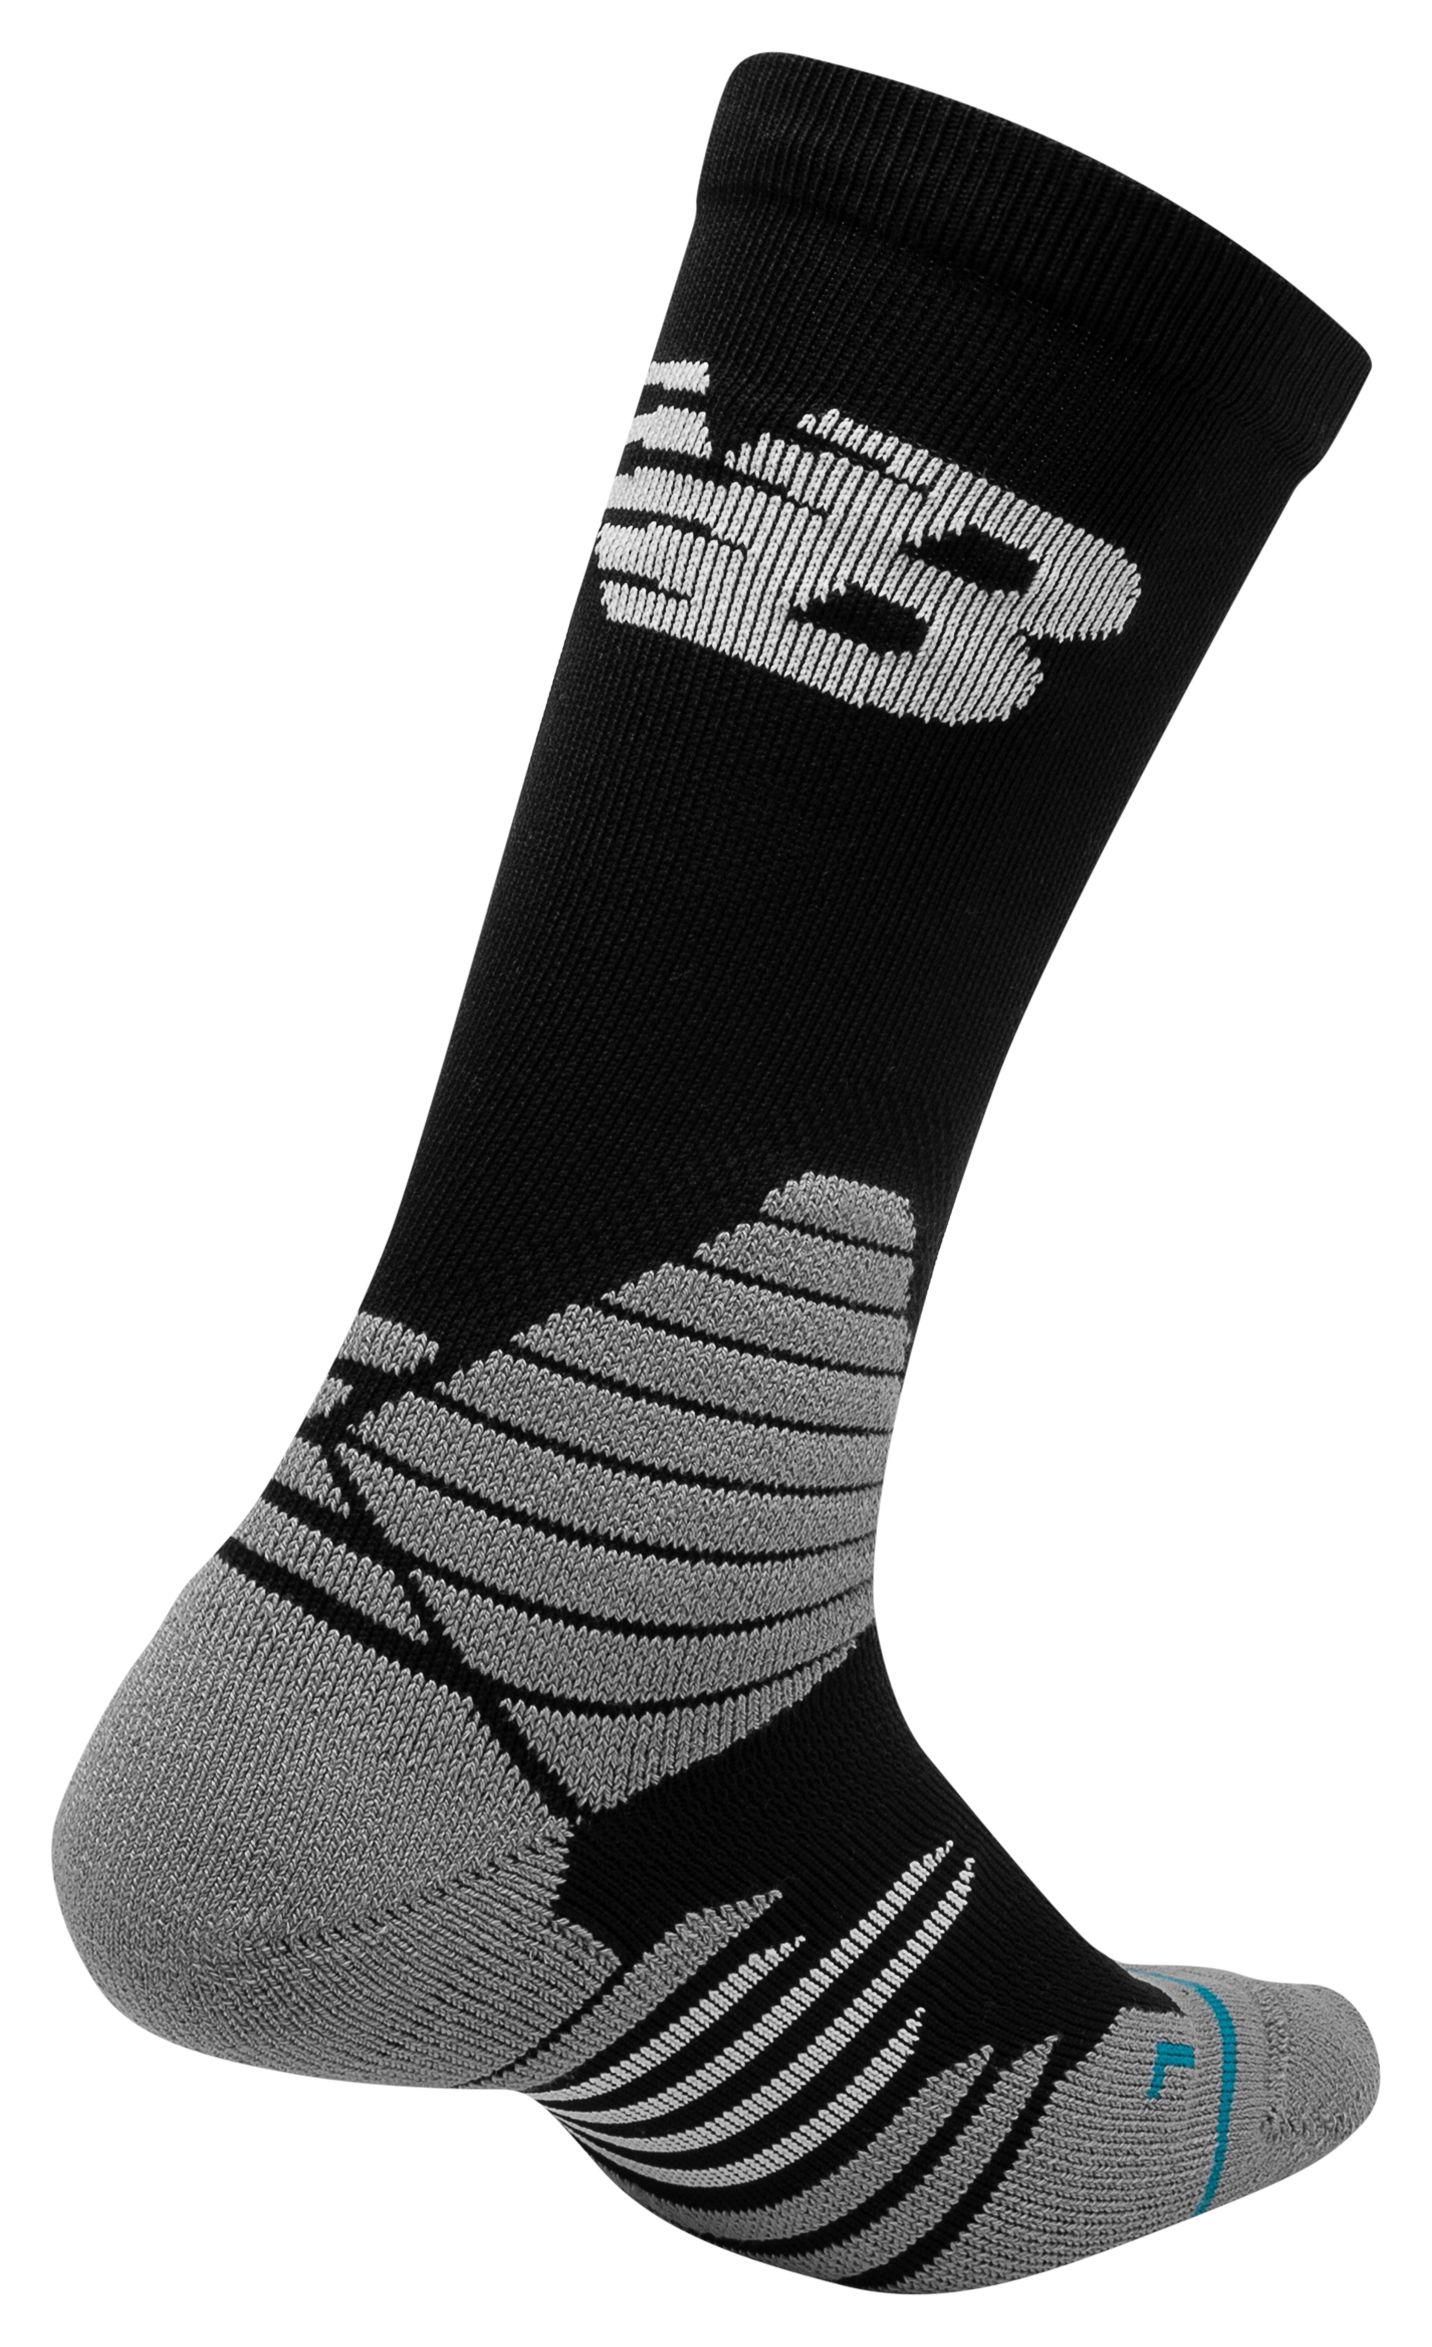 New Balance Synthetic X Stance Hoops Socks in Black/Grey (Black) for Men -  Lyst